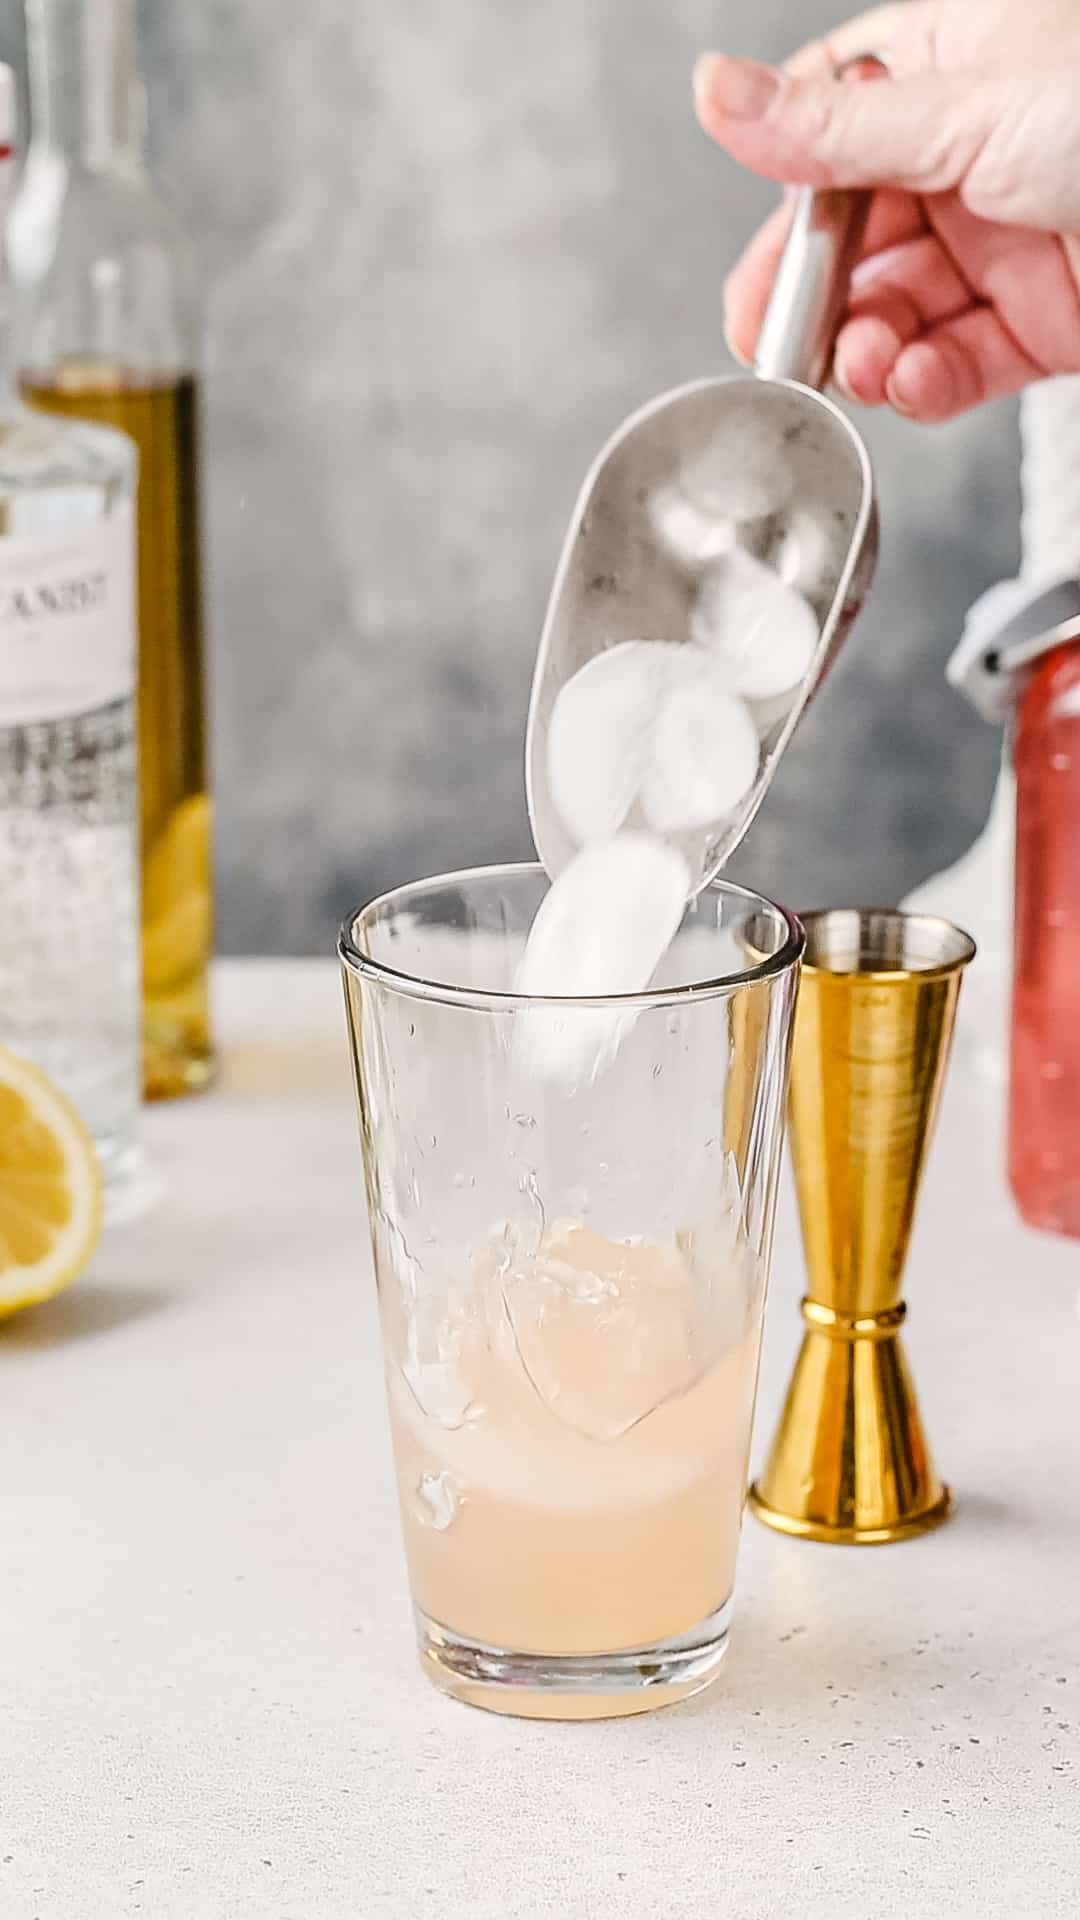 Hand using a metal scoop to add ice to a cocktail shaker.